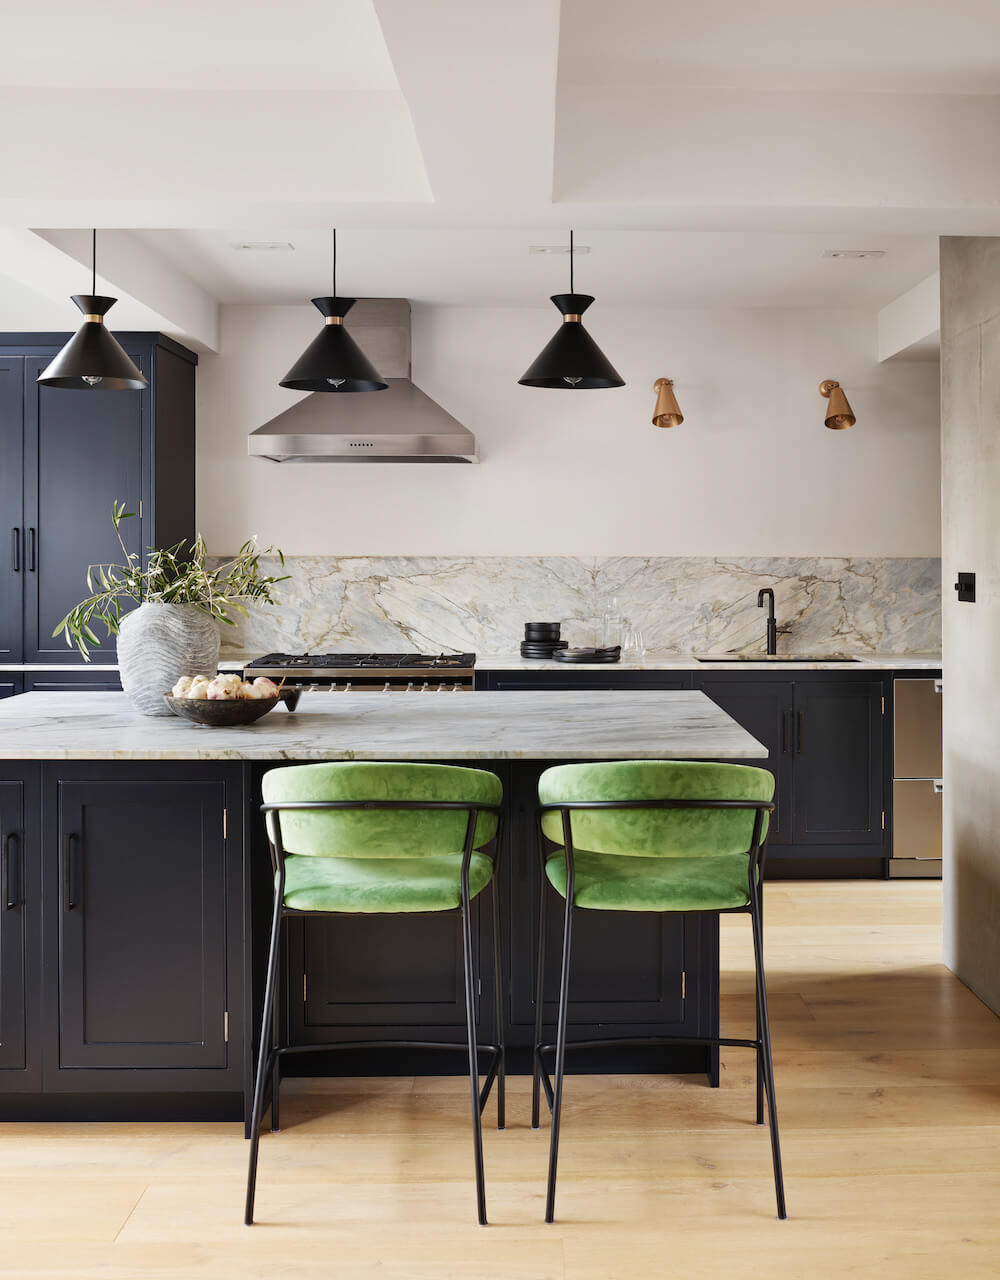 A Perfect Family Kitchen by Harvey Jones - The Kitchen Think